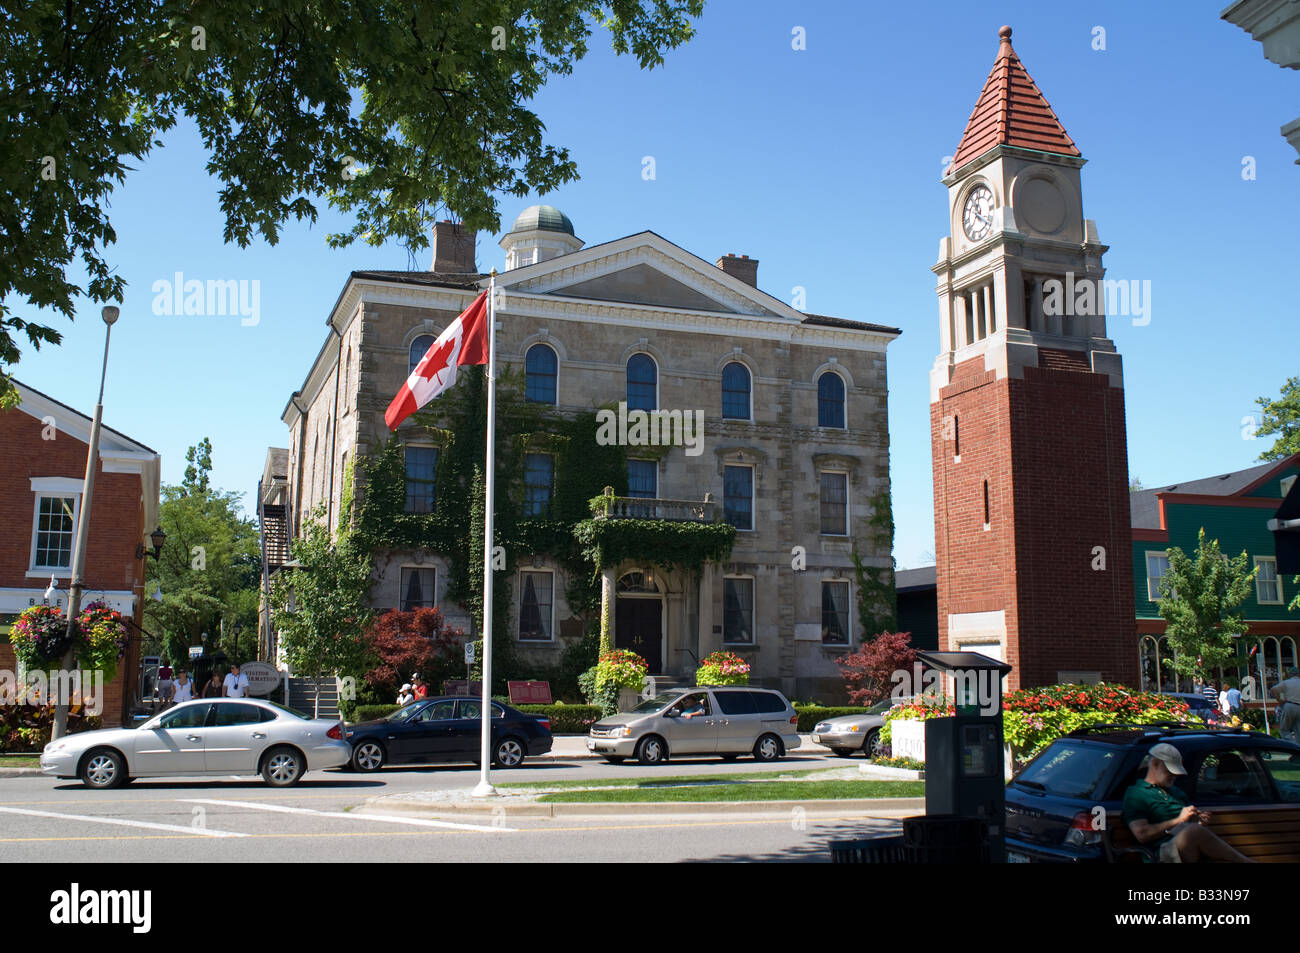 View of the clock tower located in front of the old courthouse in the village of Niagara-on-the-Lake, Ontario, Canada. Stock Photo